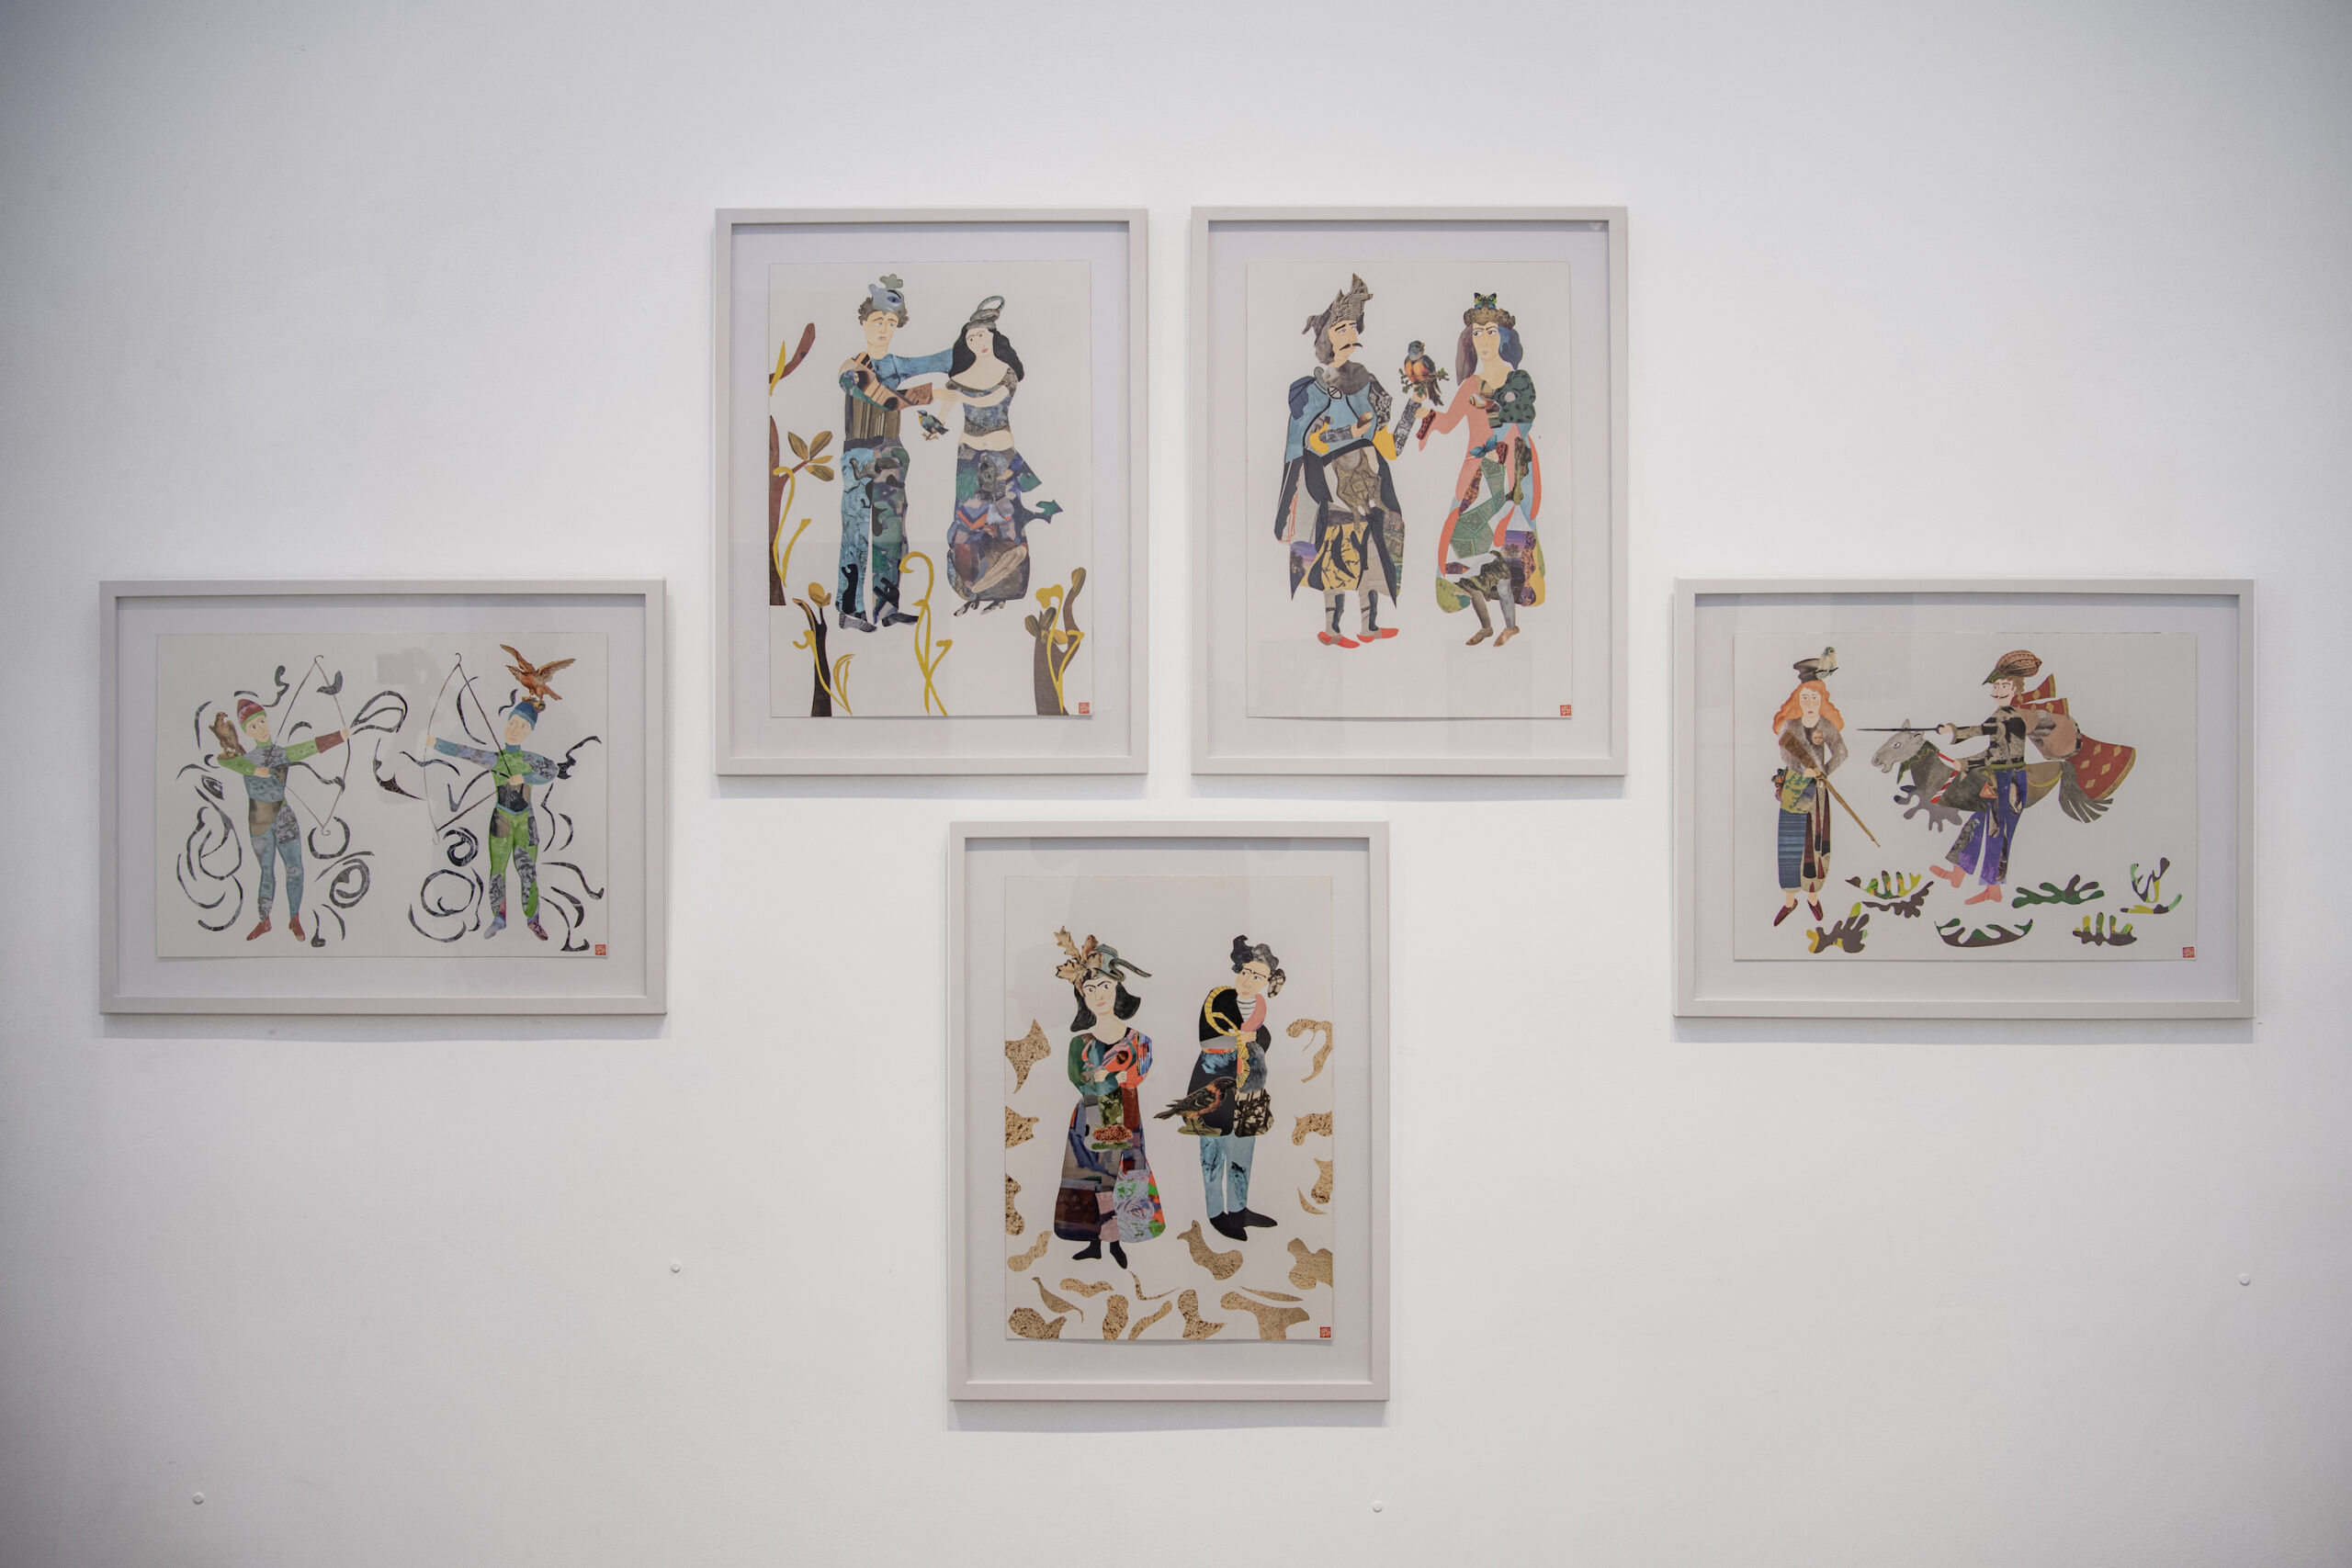 Installation from "Searching for Myself in the Forest of Bewitchment," featuring five watercolor and collage works on paper by Iranian artist Afsoon